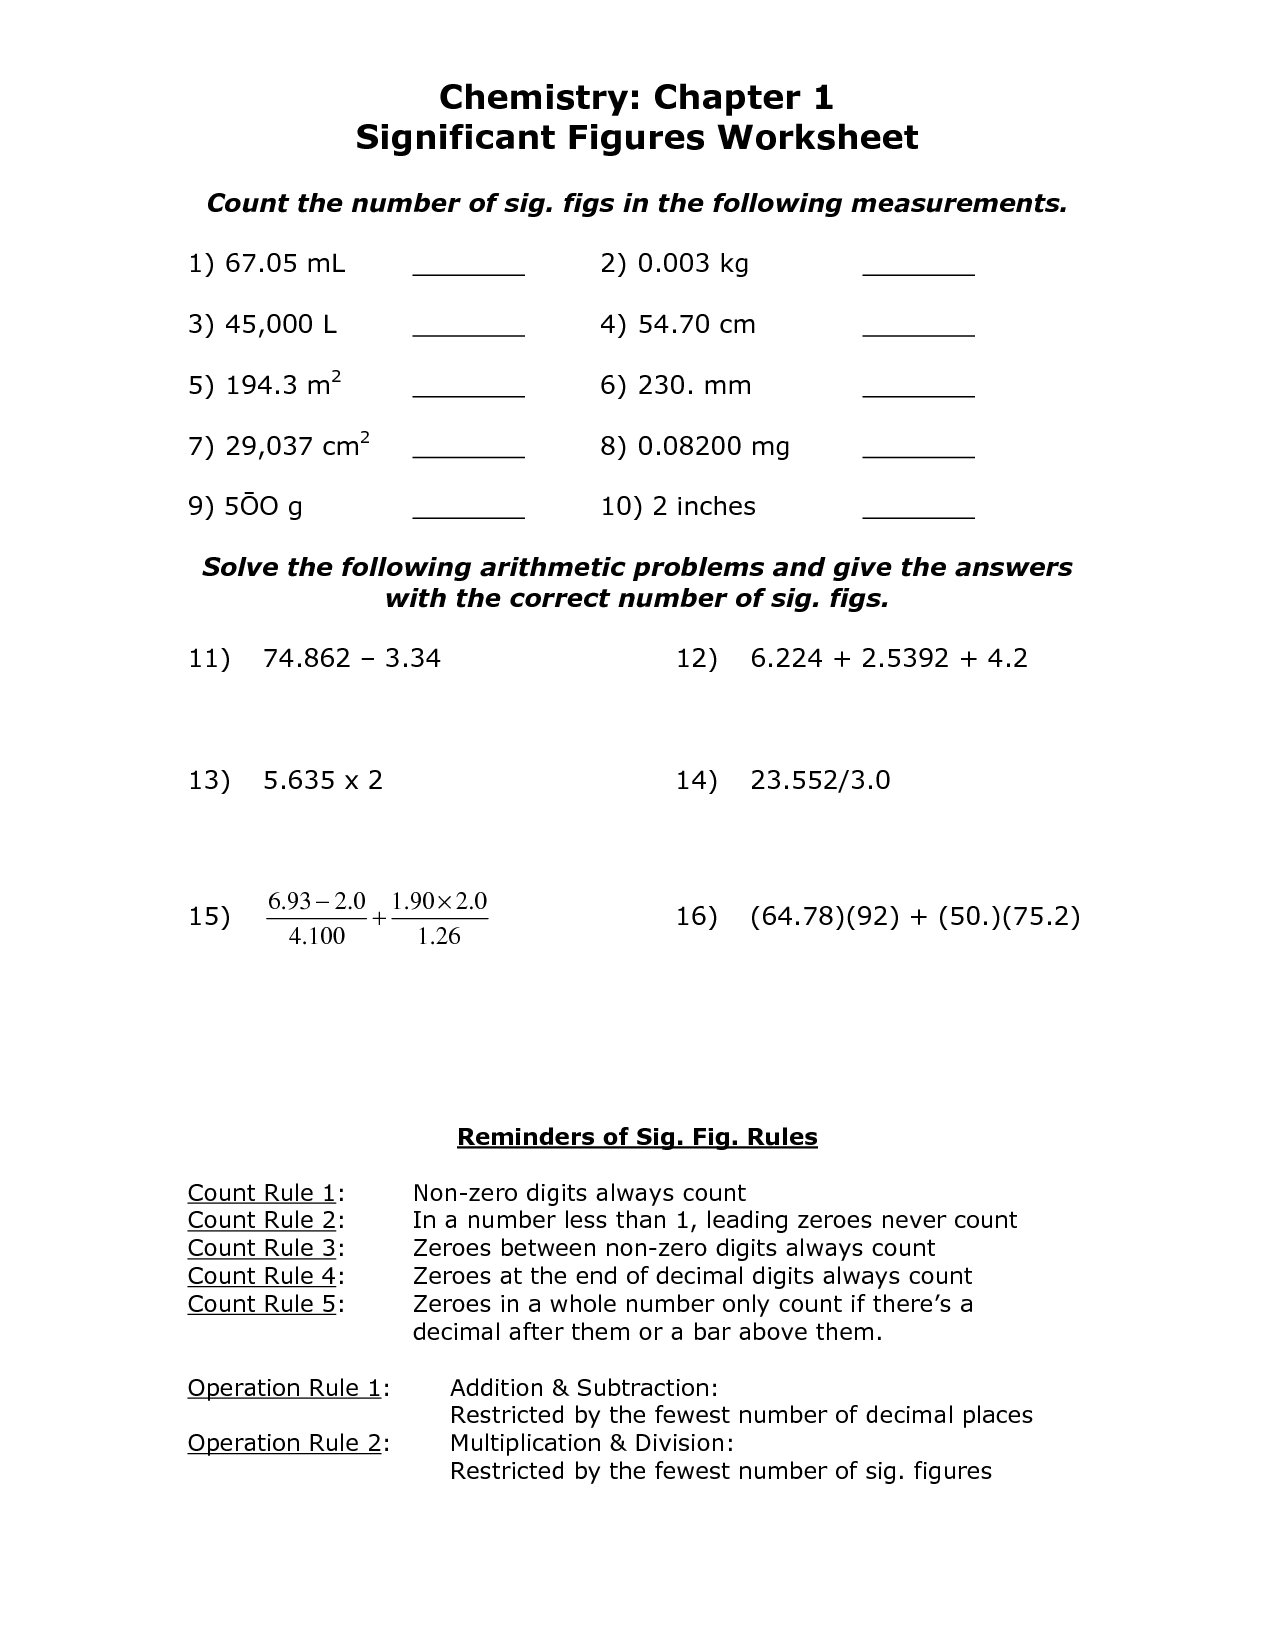 Significant Figures Worksheet Chemistry​: Detailed Login With Regard To Significant Figures Worksheet Chemistry